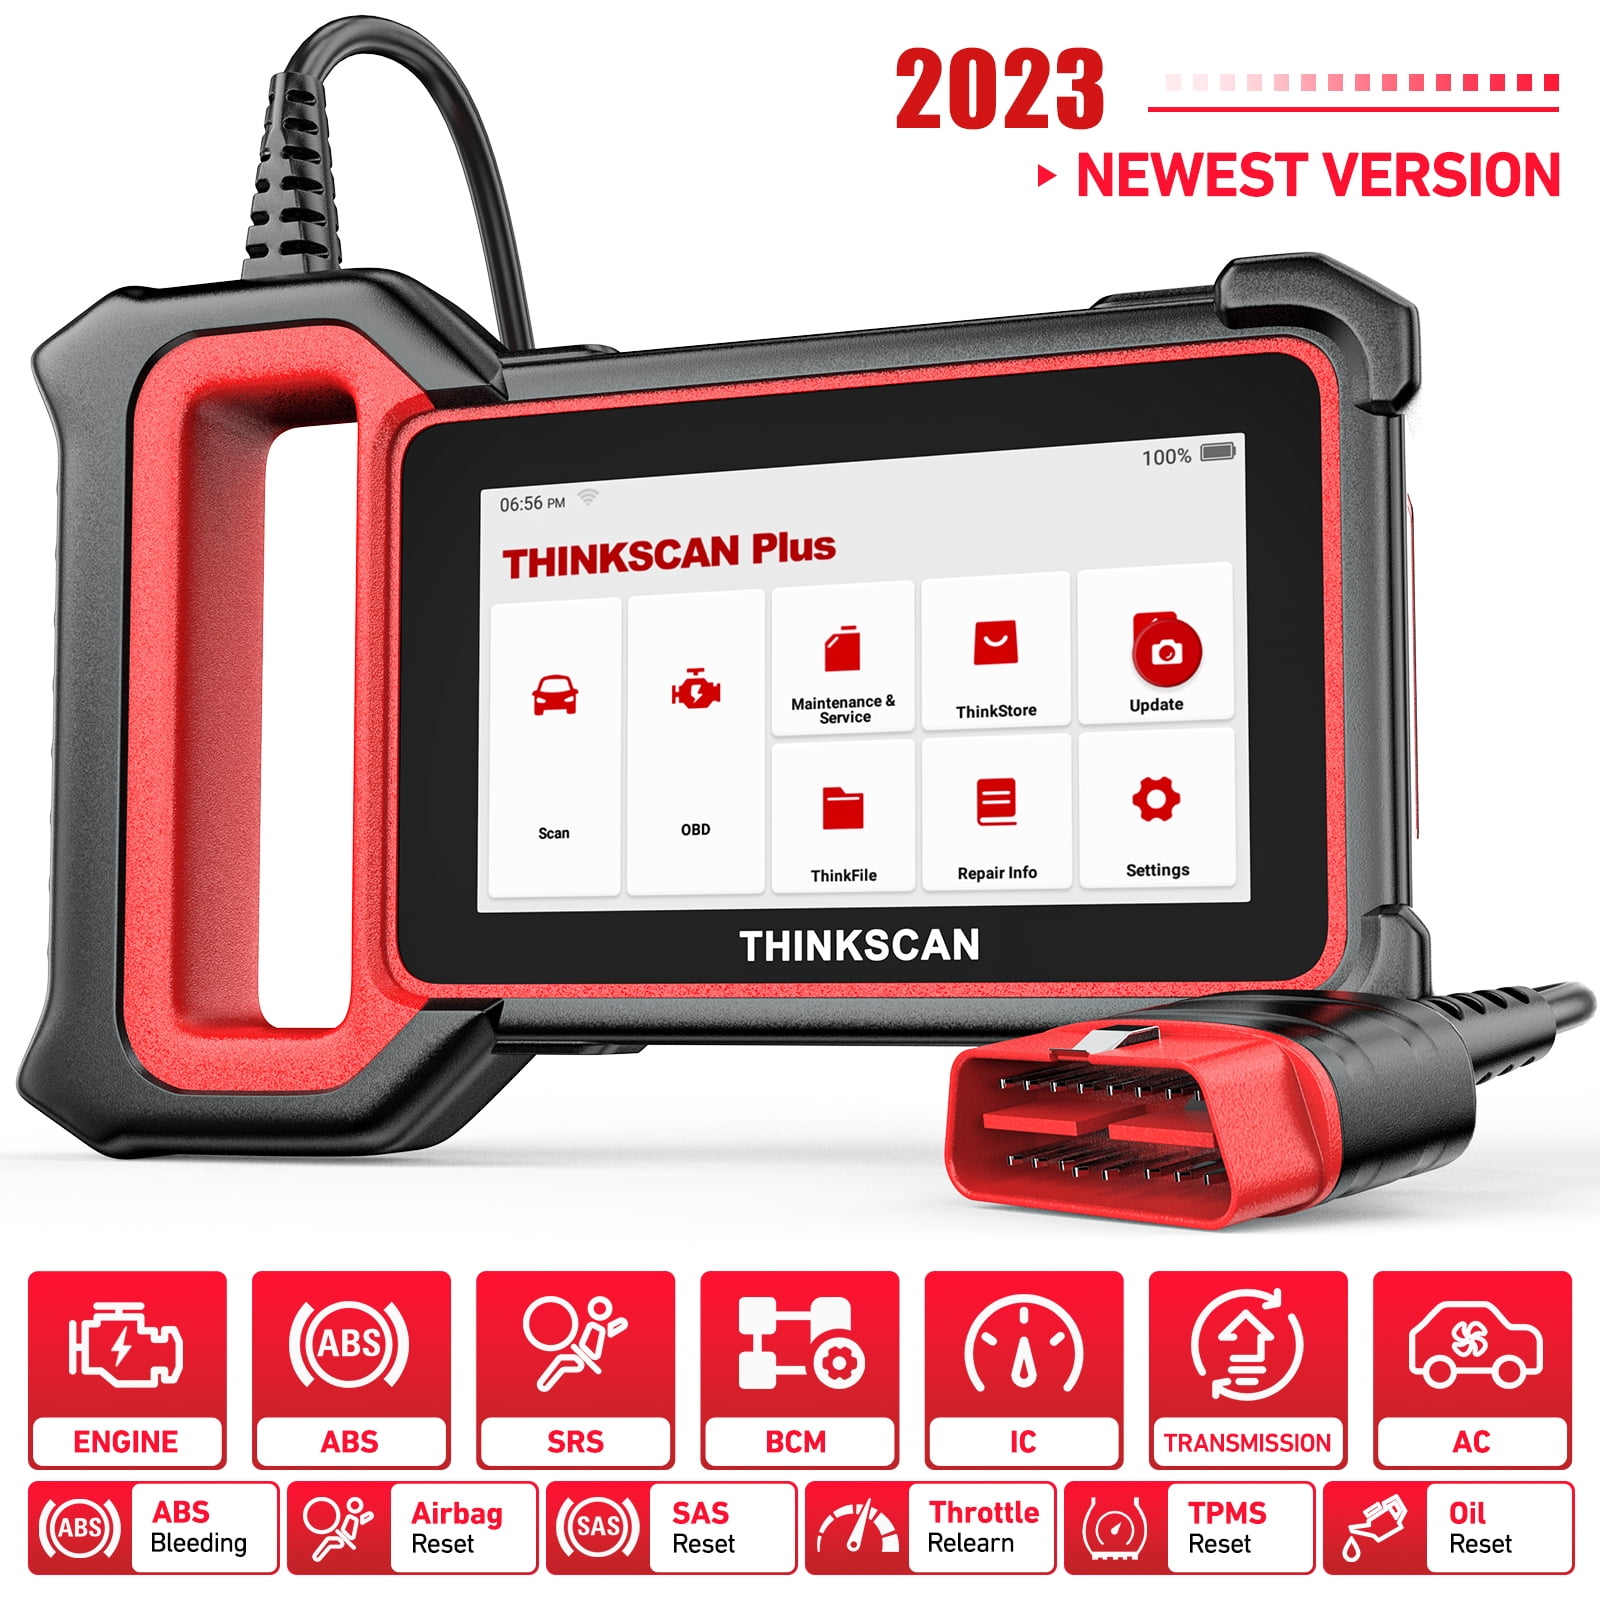 THINKCAR Thinkscan Plus S7 Automotive Diagnostic Scan Tool OBD2 Scanner 7 with Free 5 Reset Services Automotive Scanner Code Reader Auto Analyzer OBD2 OBD Car Scanner Auto VIN Vehicle Reader